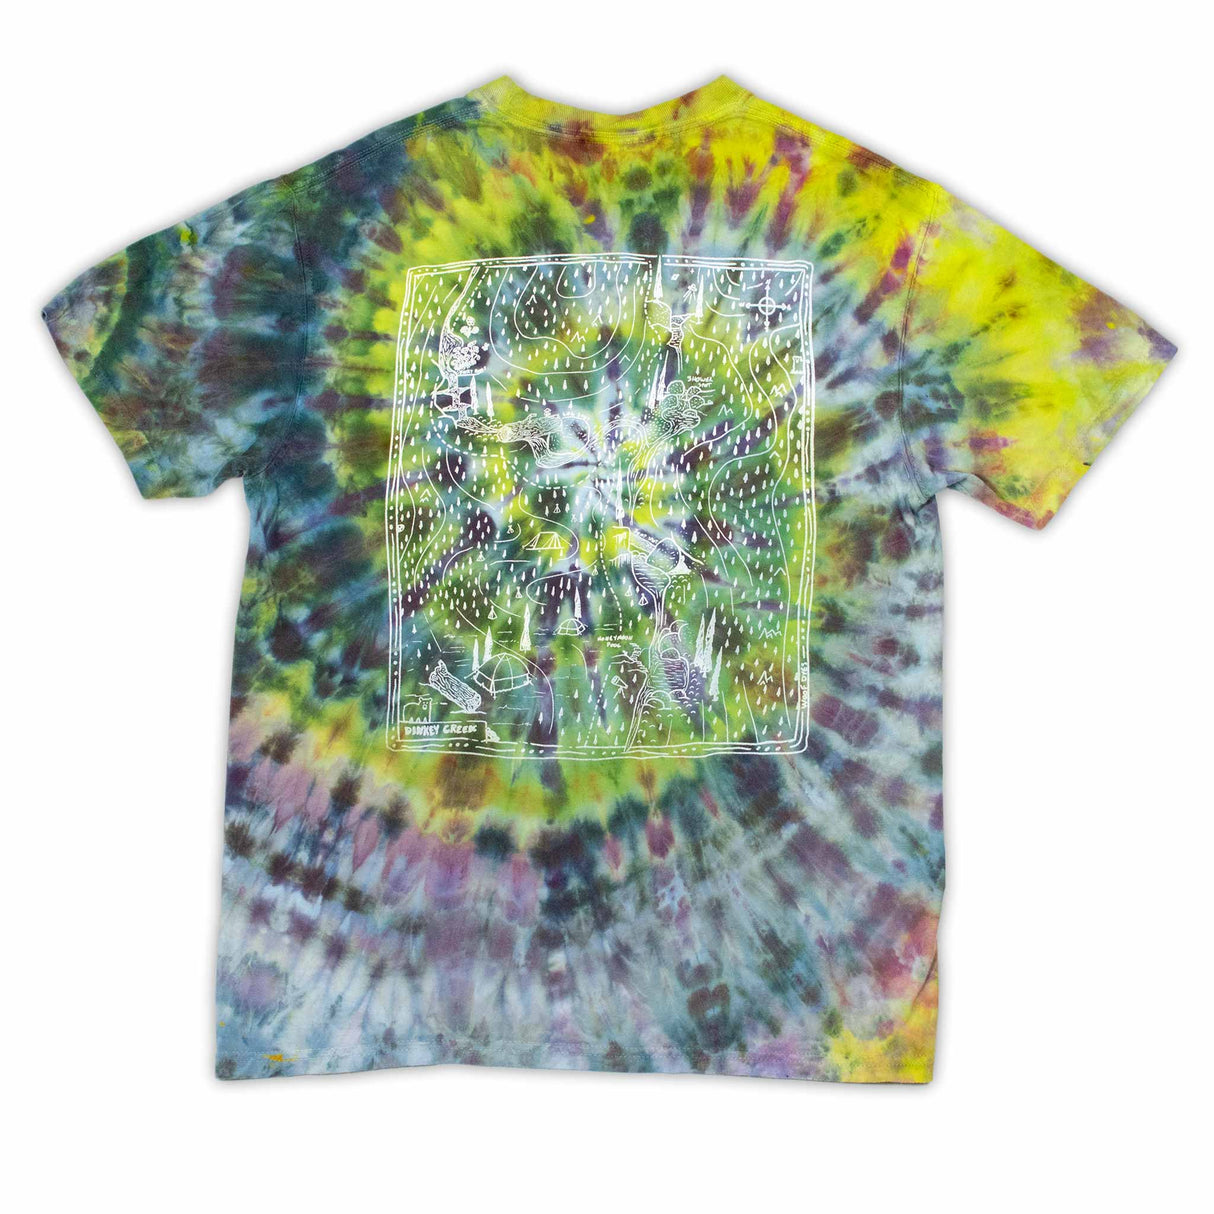 A kaleidoscope of colors forms a spiral ice dye design on this t-shirt, featuring 'Dinkey Creek' in a contrasting print, creating an eye-catching effect